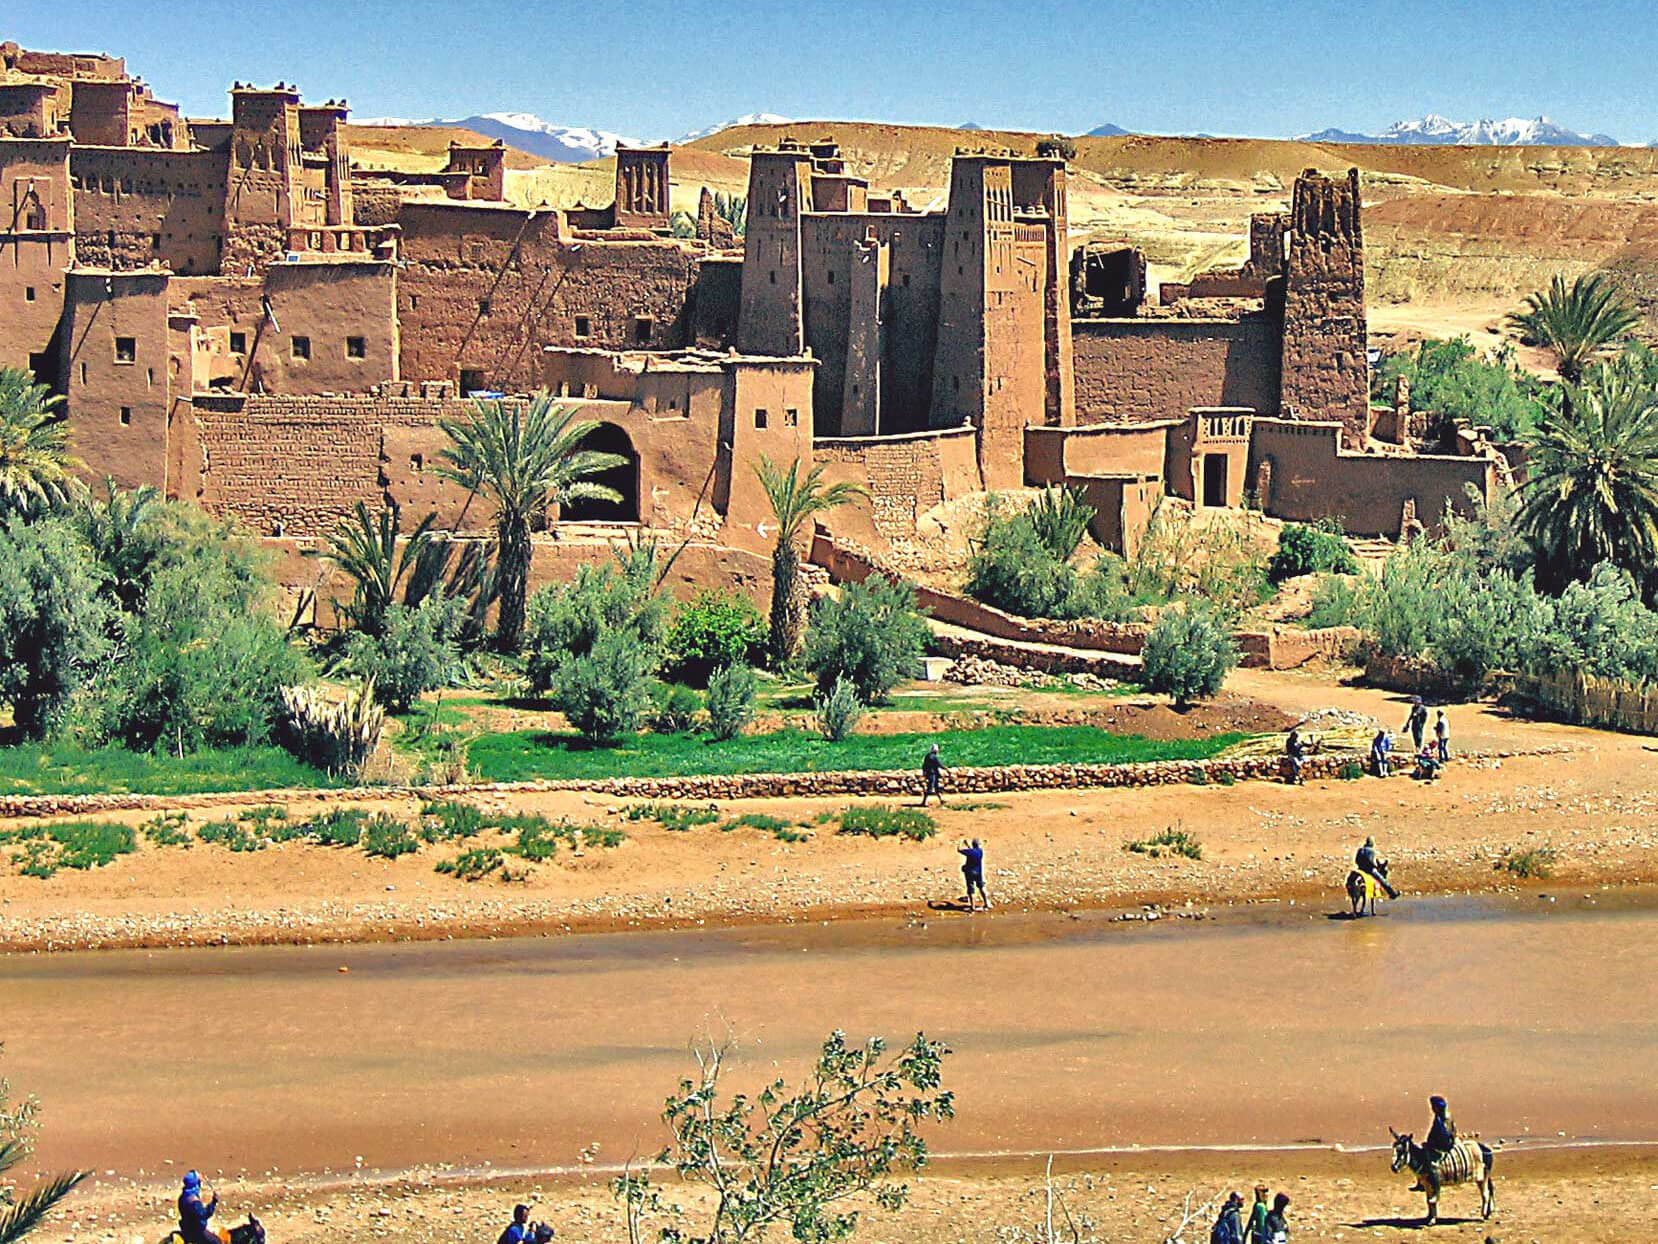 Budget ait ben haddou & Ouarzazate excursion from marrakech in group